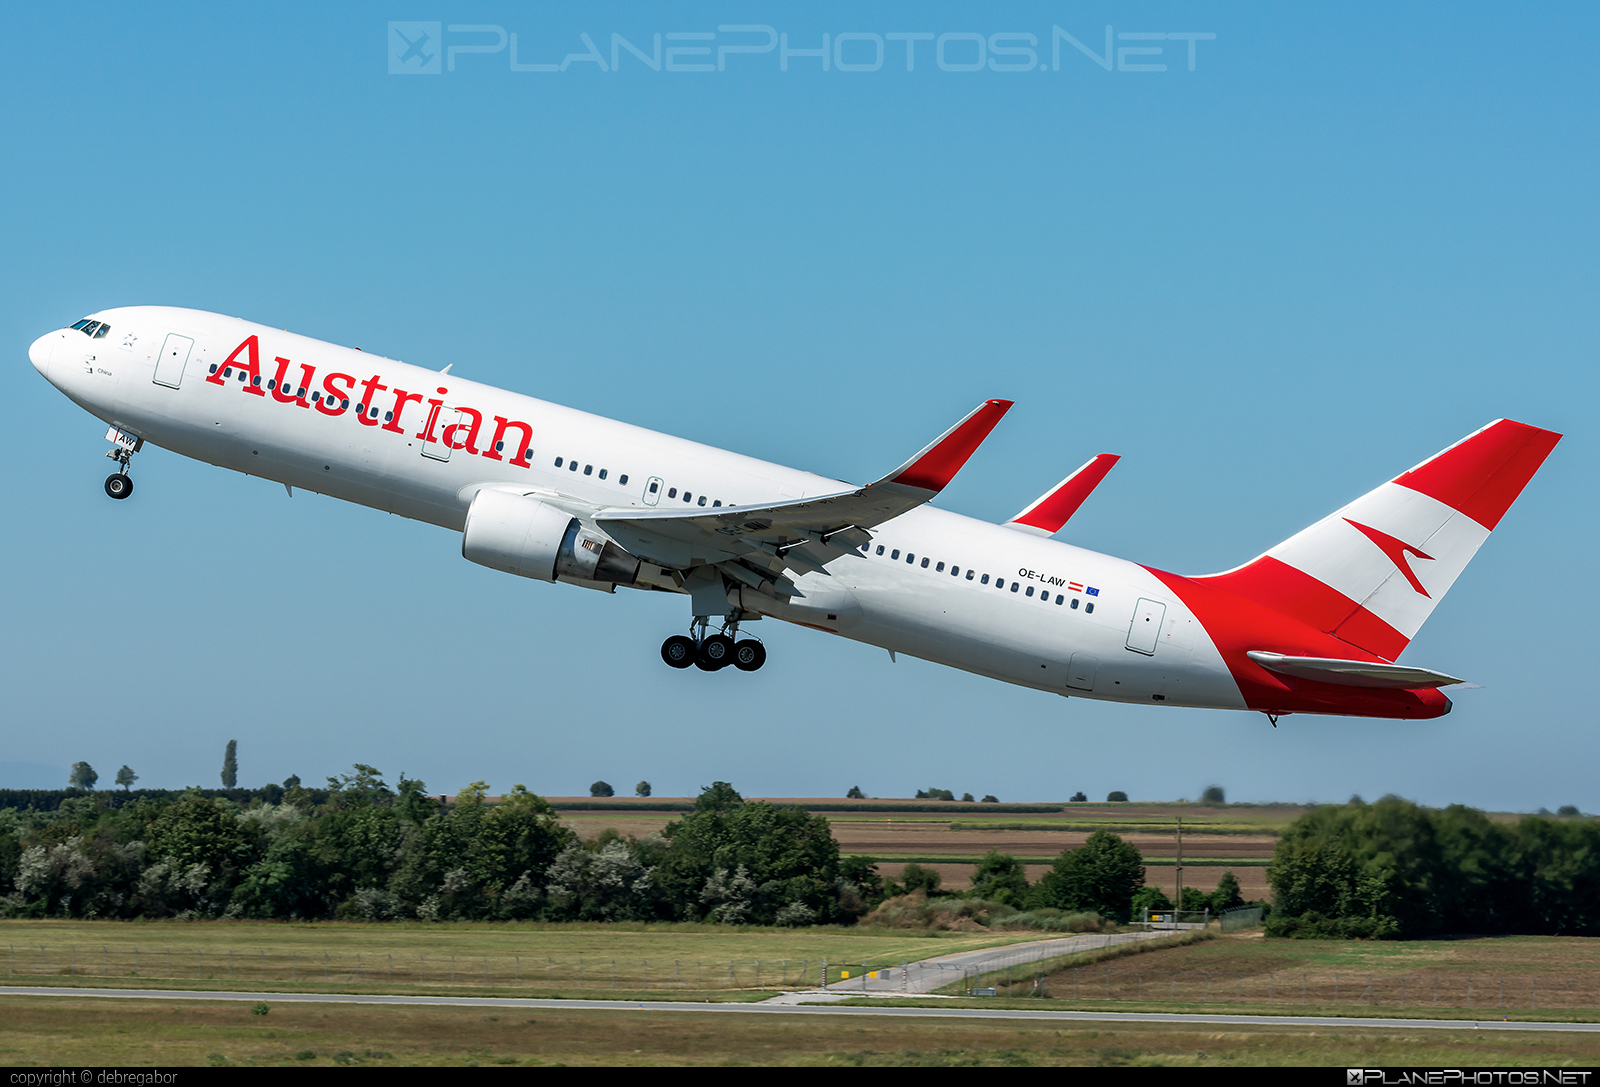 Boeing 767-300ER - OE-LAW operated by Austrian Airlines #austrian #austrianAirlines #b767 #b767er #boeing #boeing767